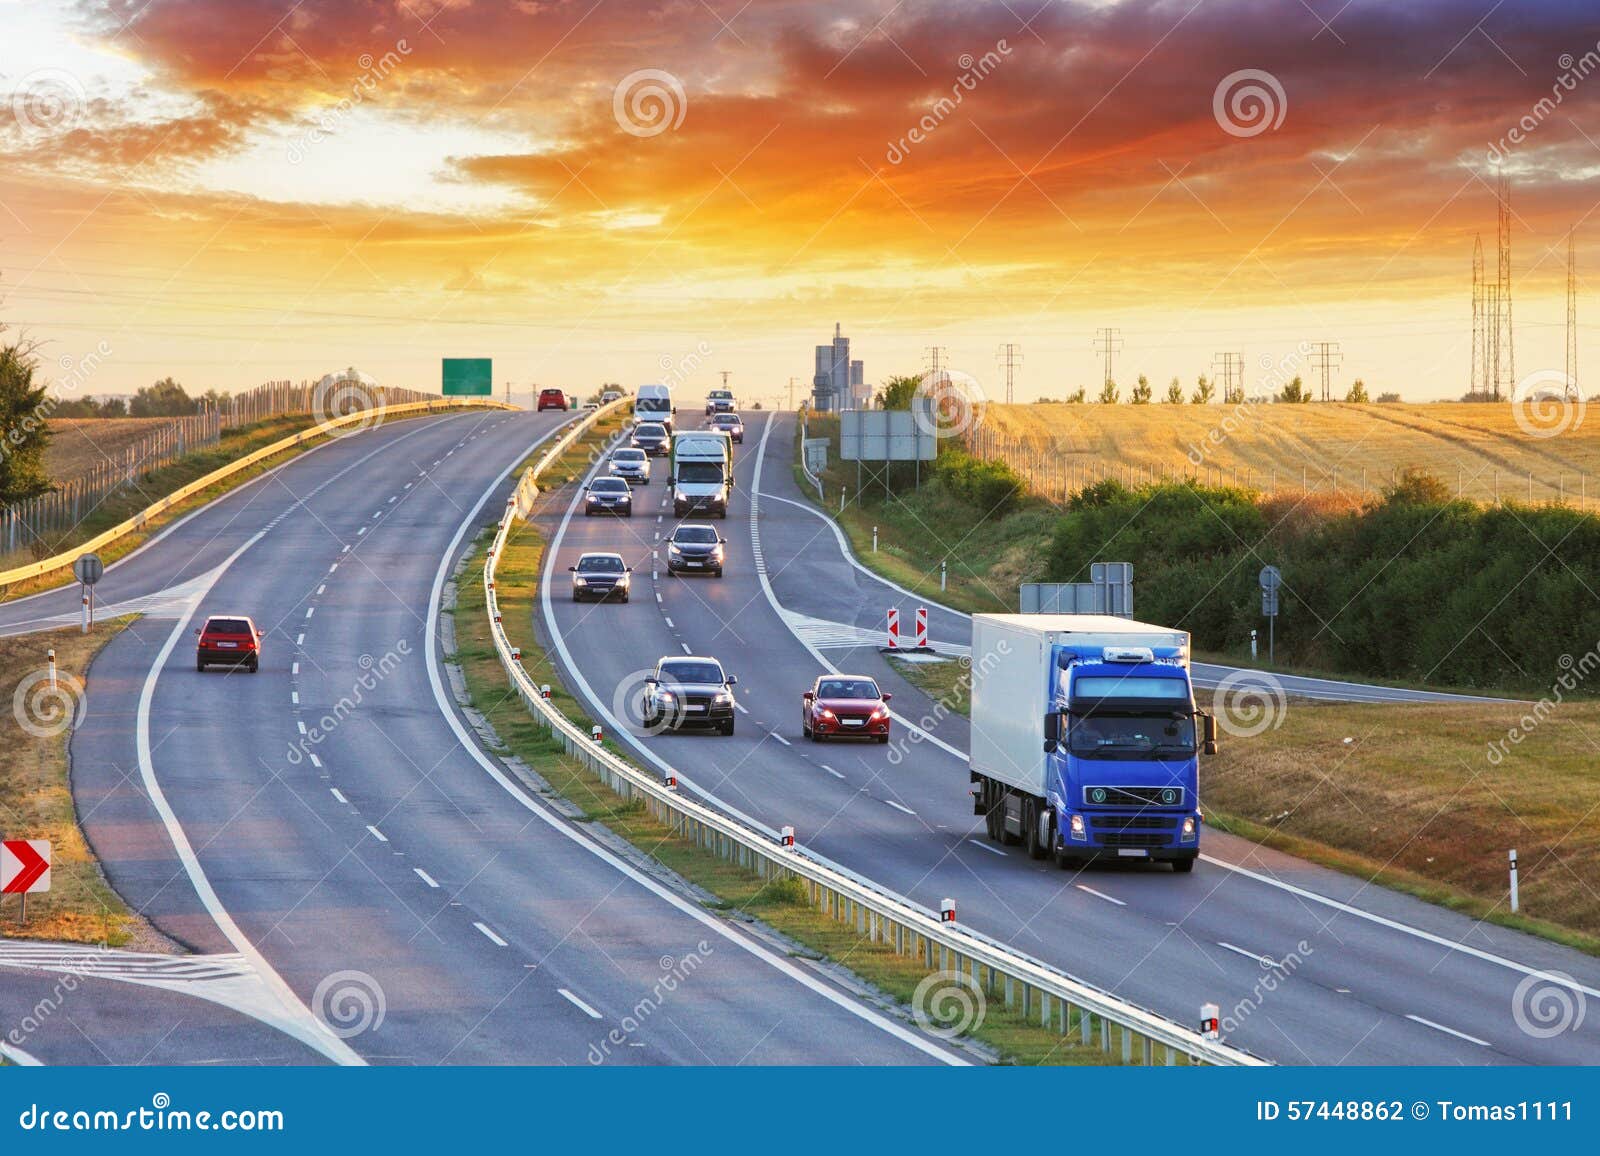 highway transportation with cars and truck